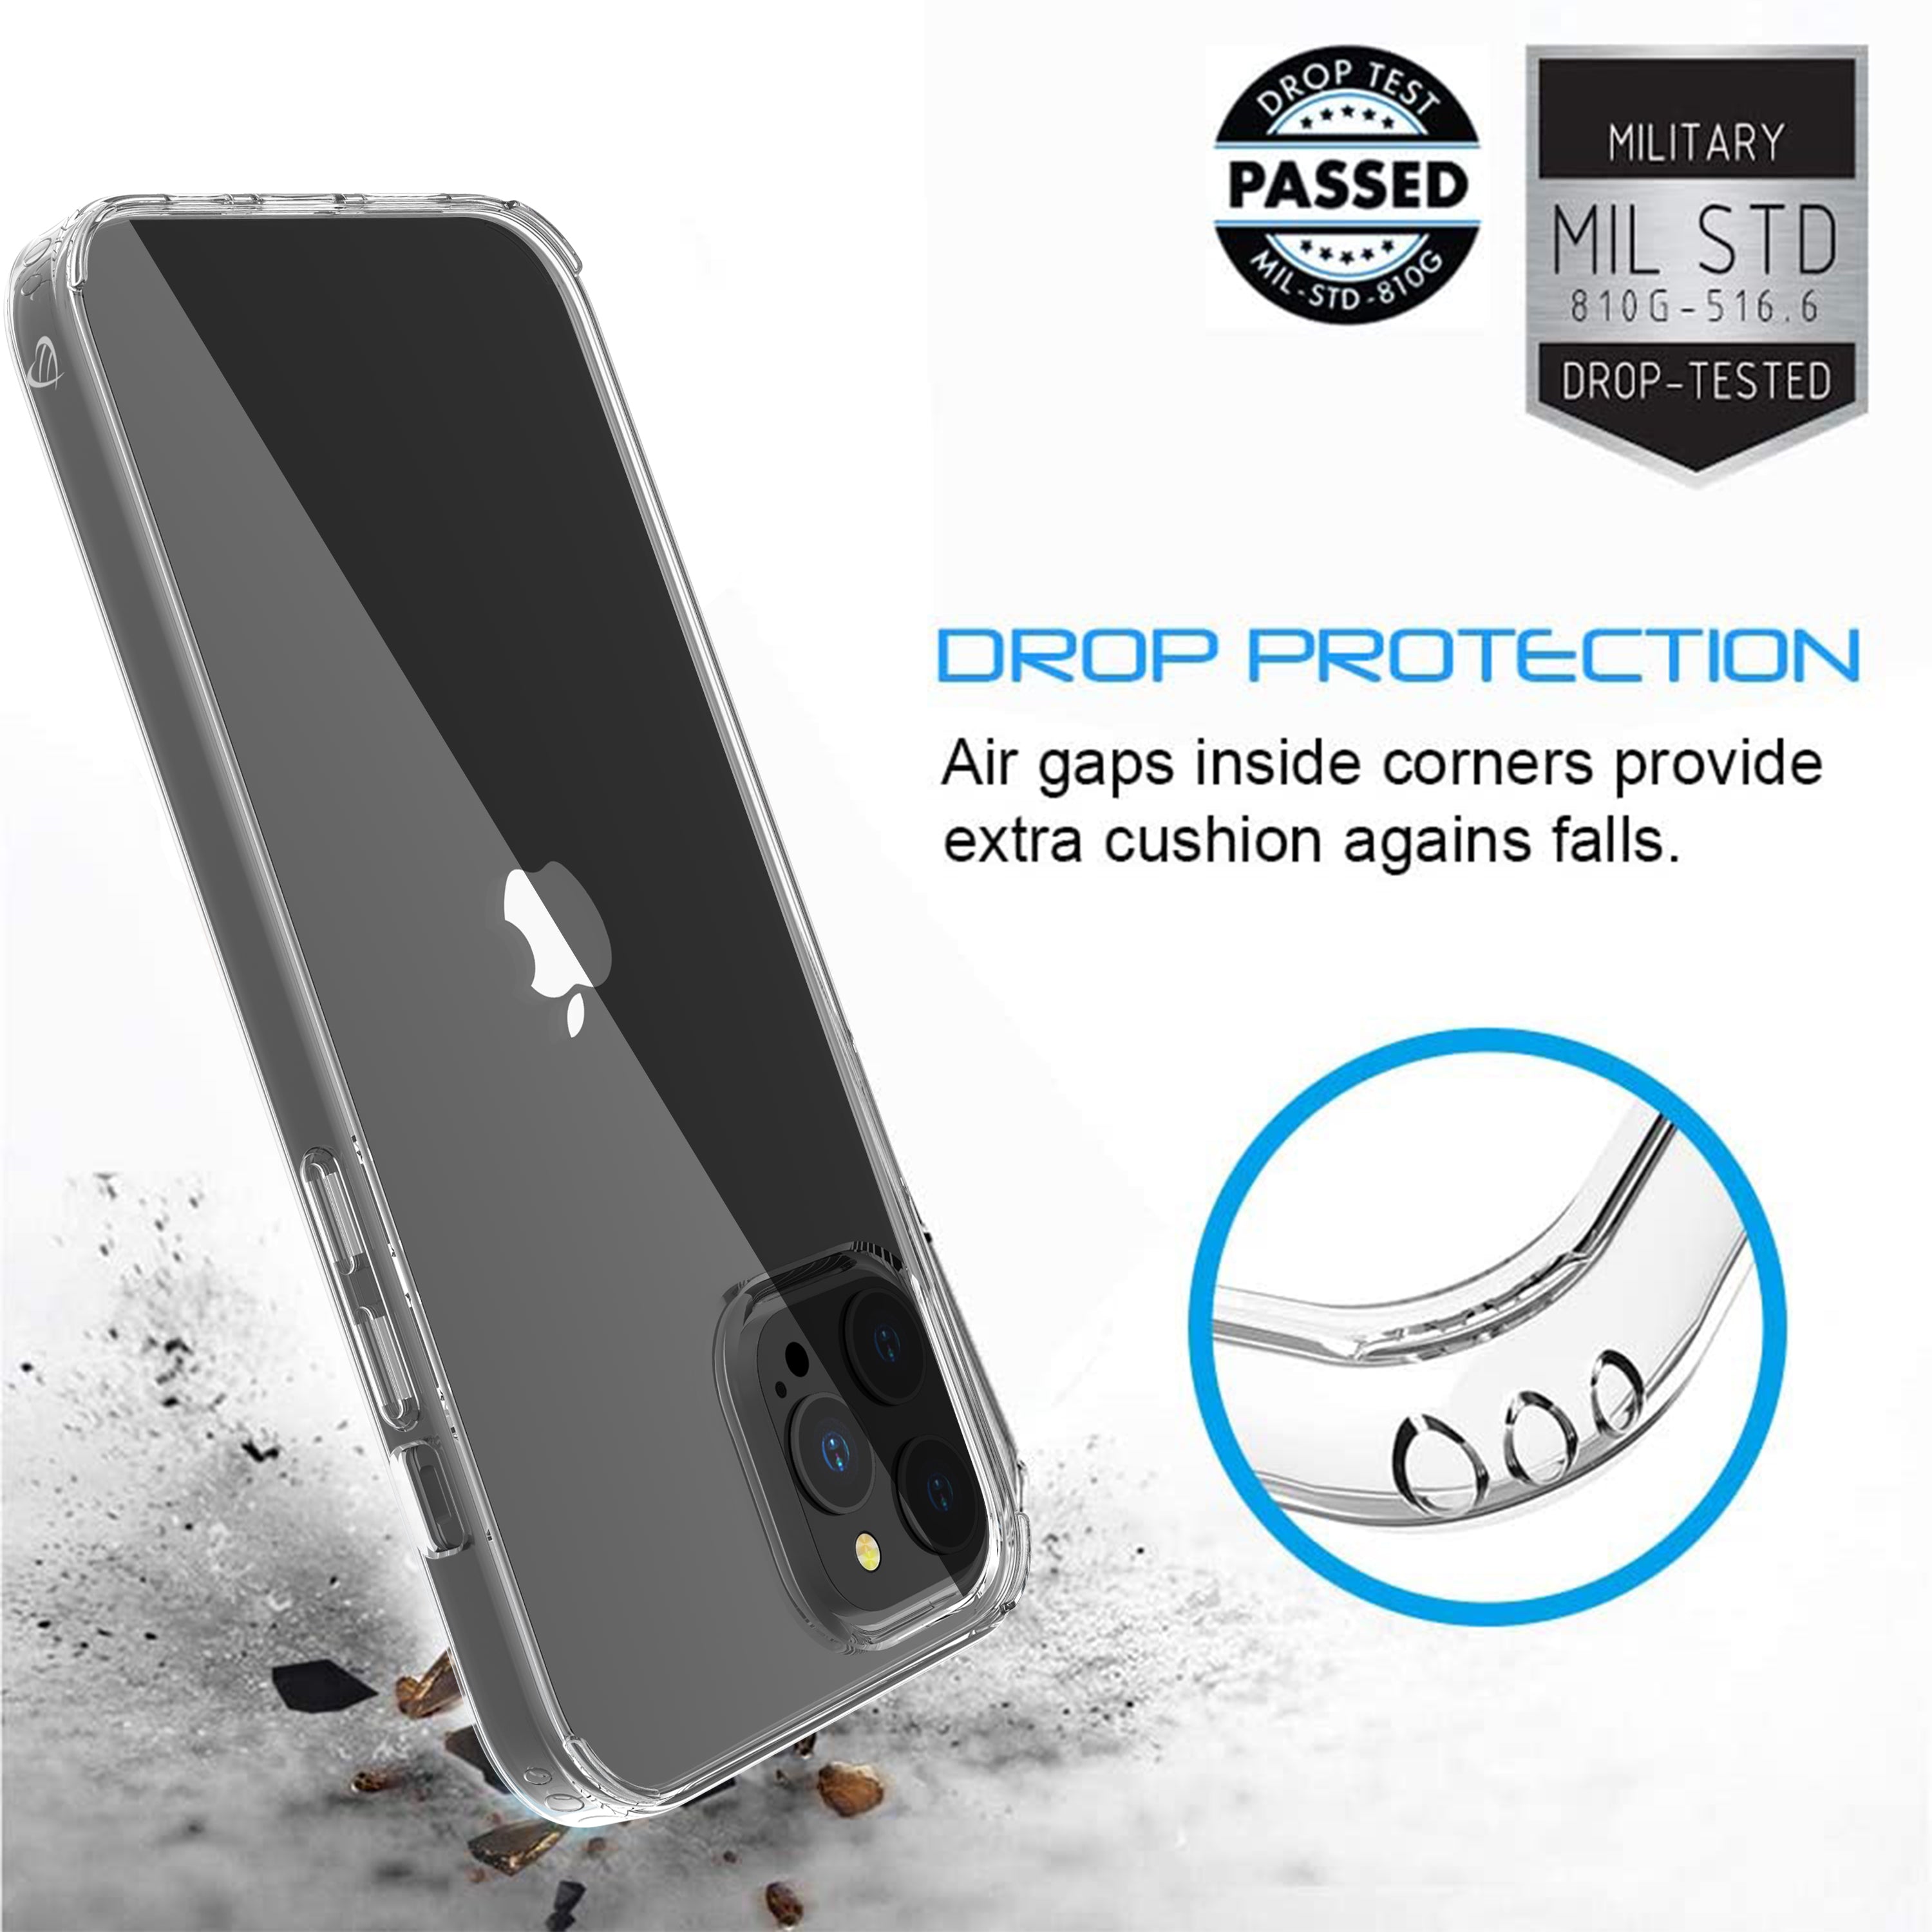 LIQUID GLASS Clear Case for Apple iPhone 12 and iPhone 12 Pro (6.1") 2020